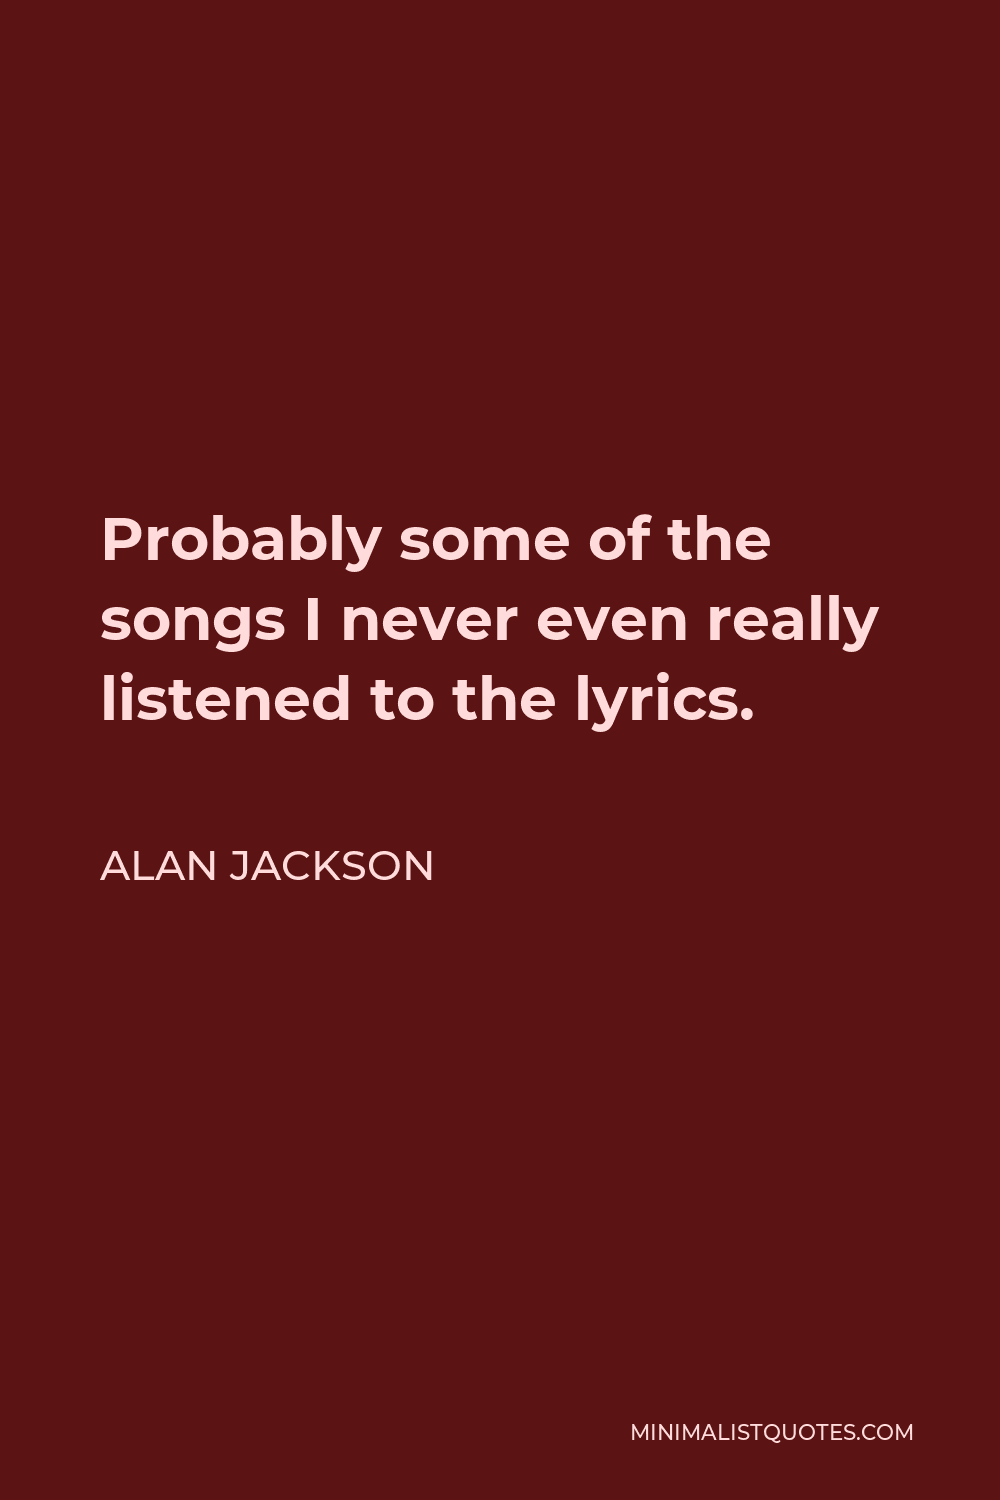 Alan Jackson Quote - Probably some of the songs I never even really listened to the lyrics.